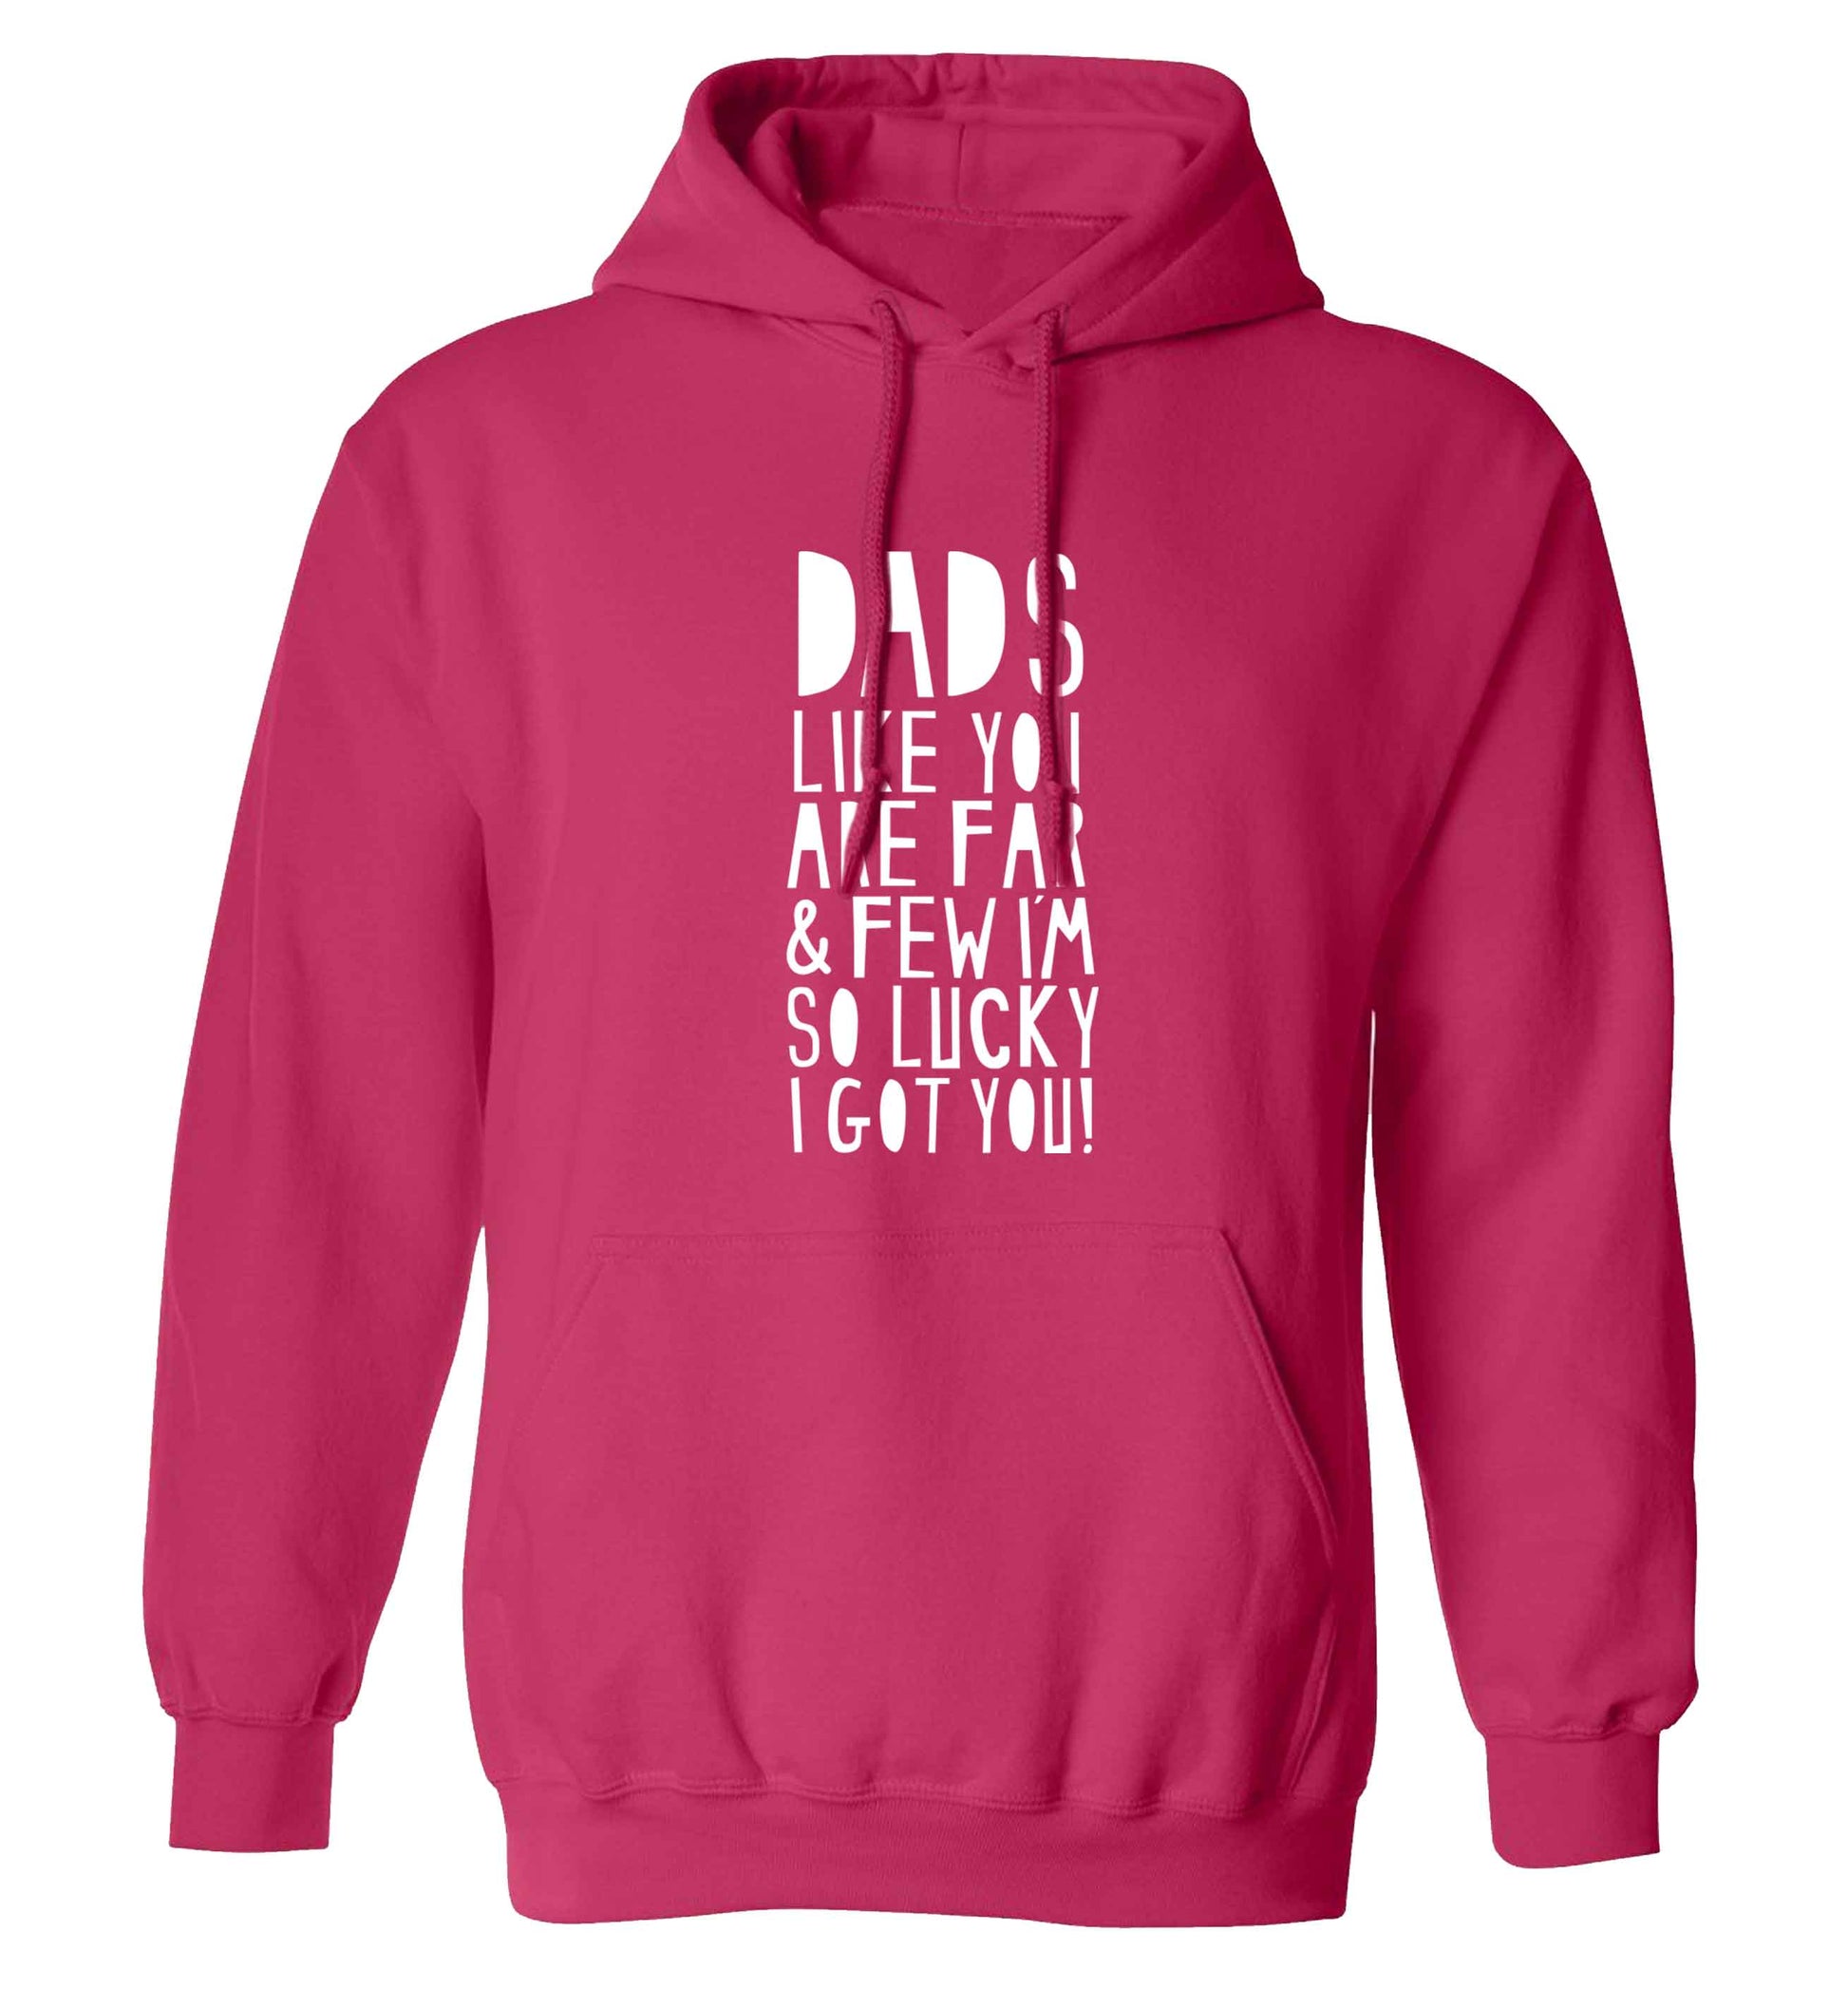 Dads like you are far and few I'm so luck I got you! adults unisex pink hoodie 2XL